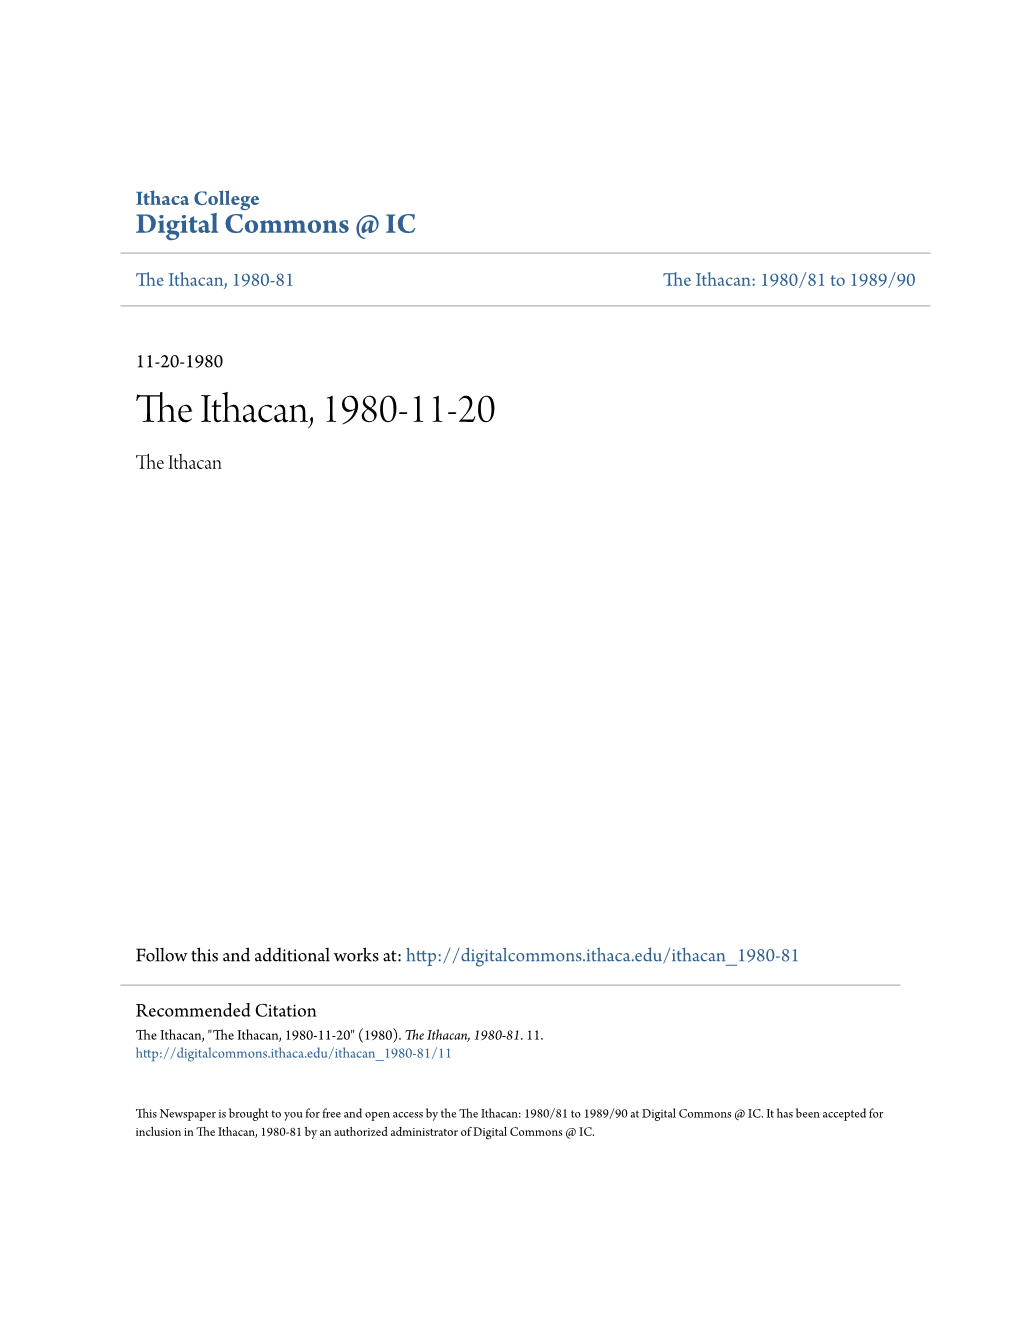 The Ithacan, 1980-11-20